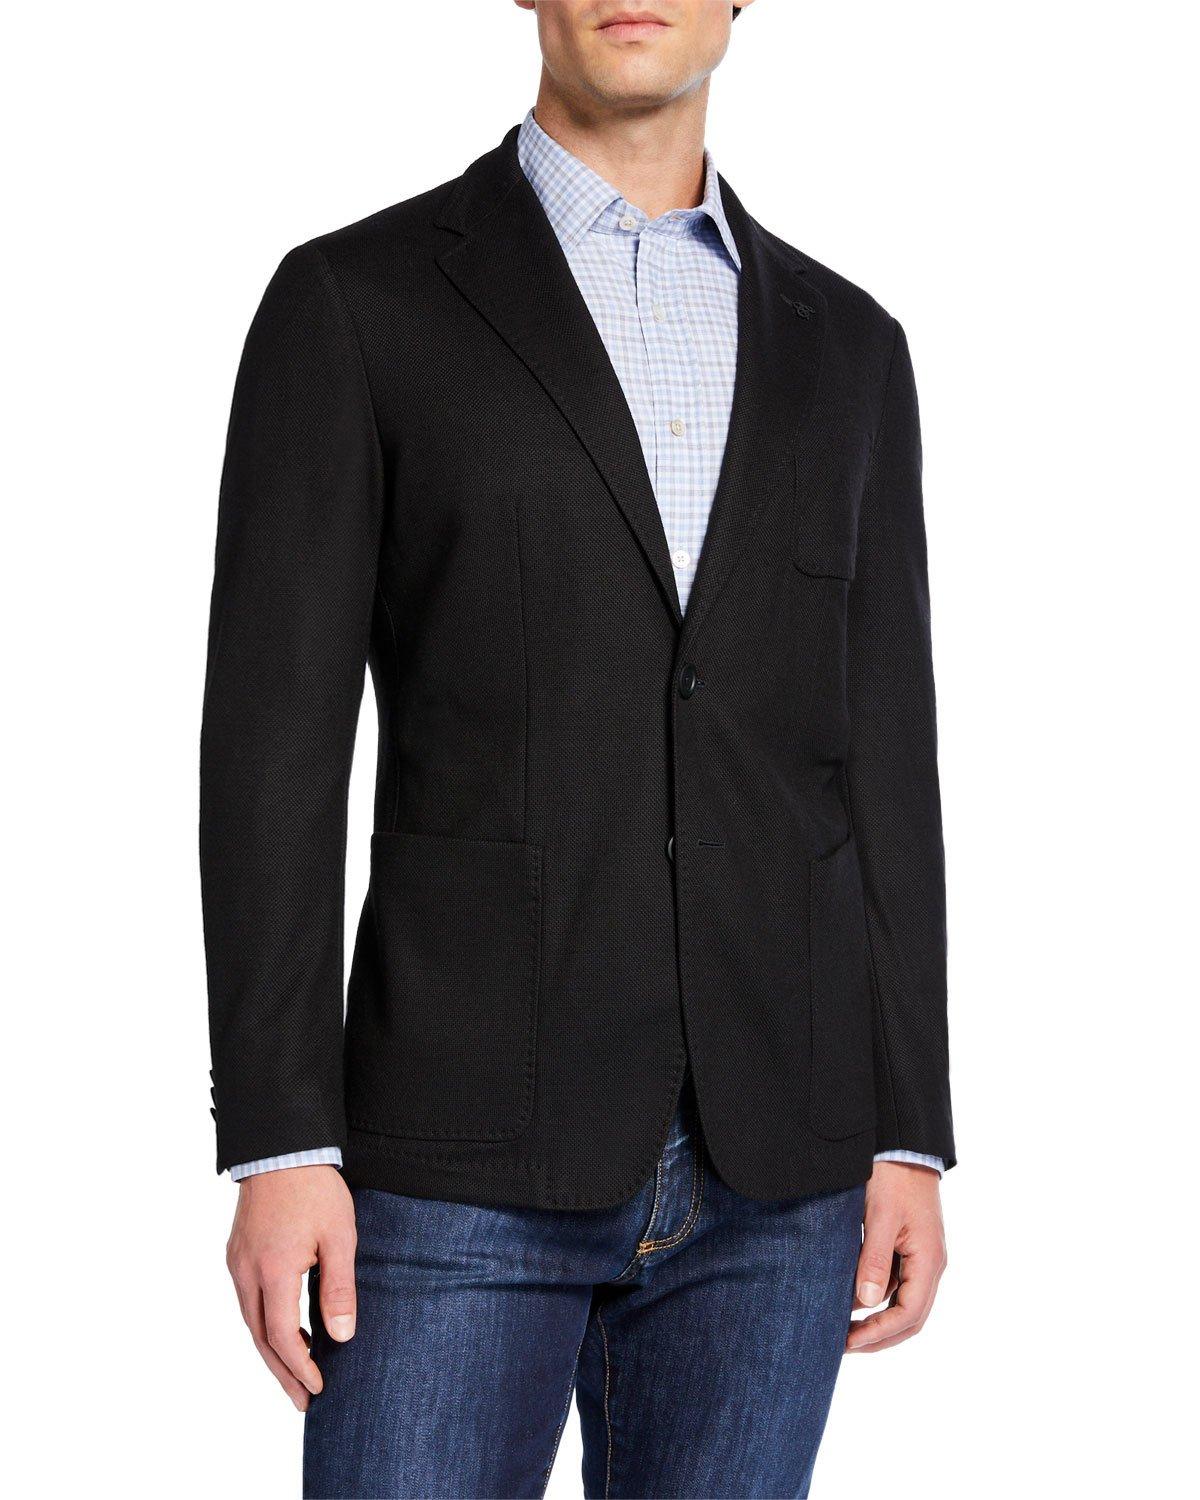 Canali Men's Edition Travel-knit Jacket in Black for Men - Lyst